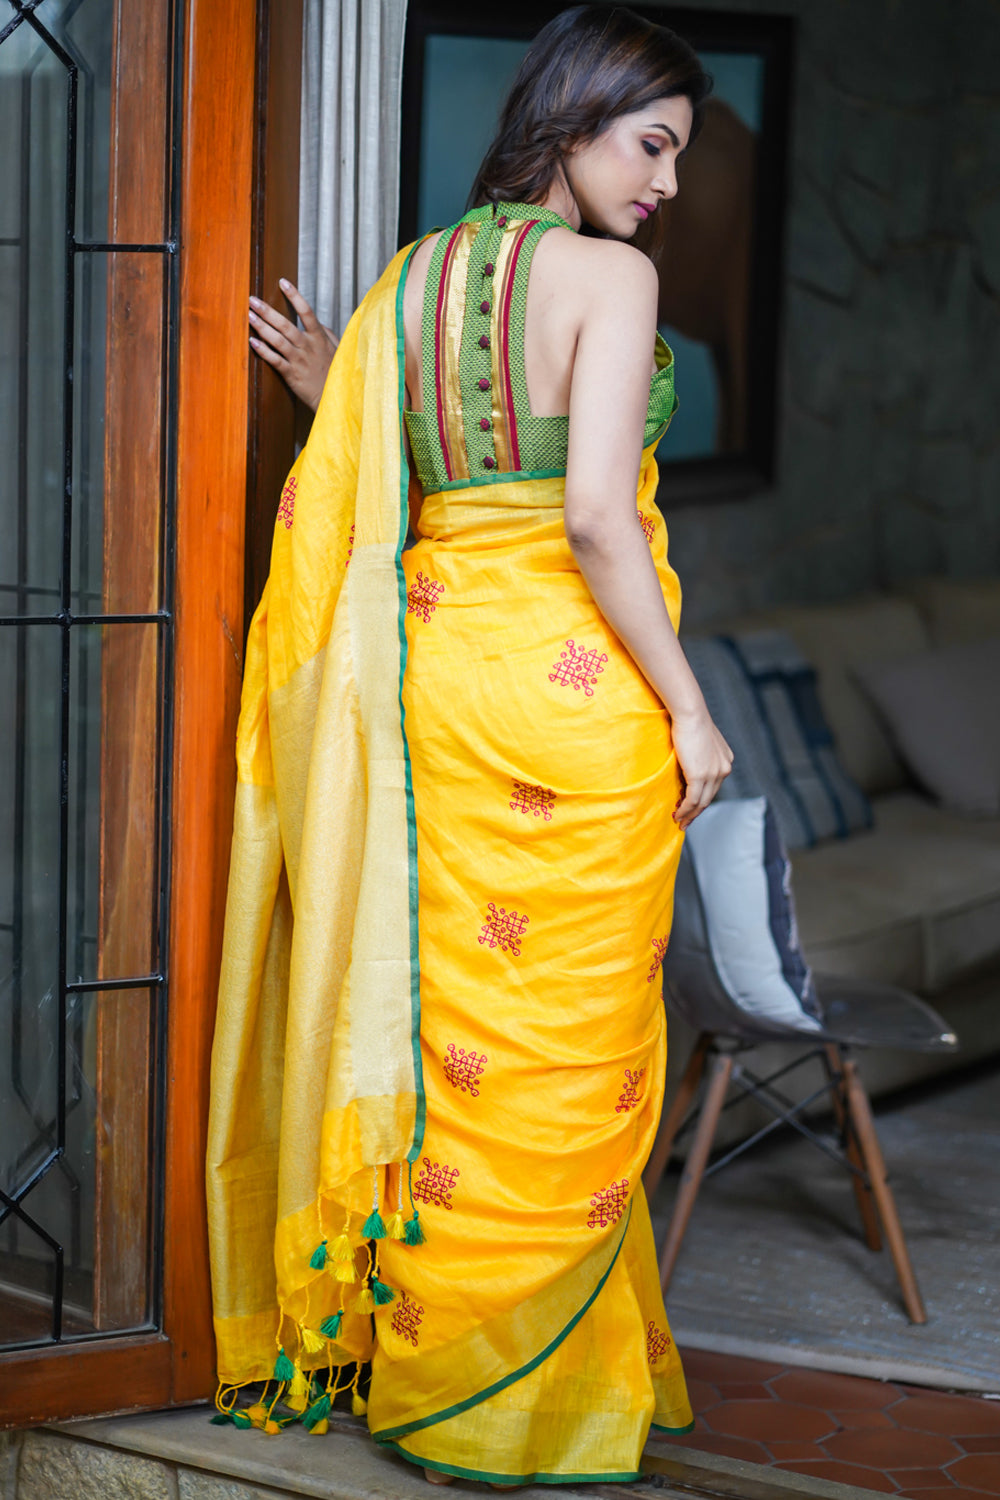 Rangoli Embroidered Border on Pure Linen by Linen Saree in Yellow, Gold and Green